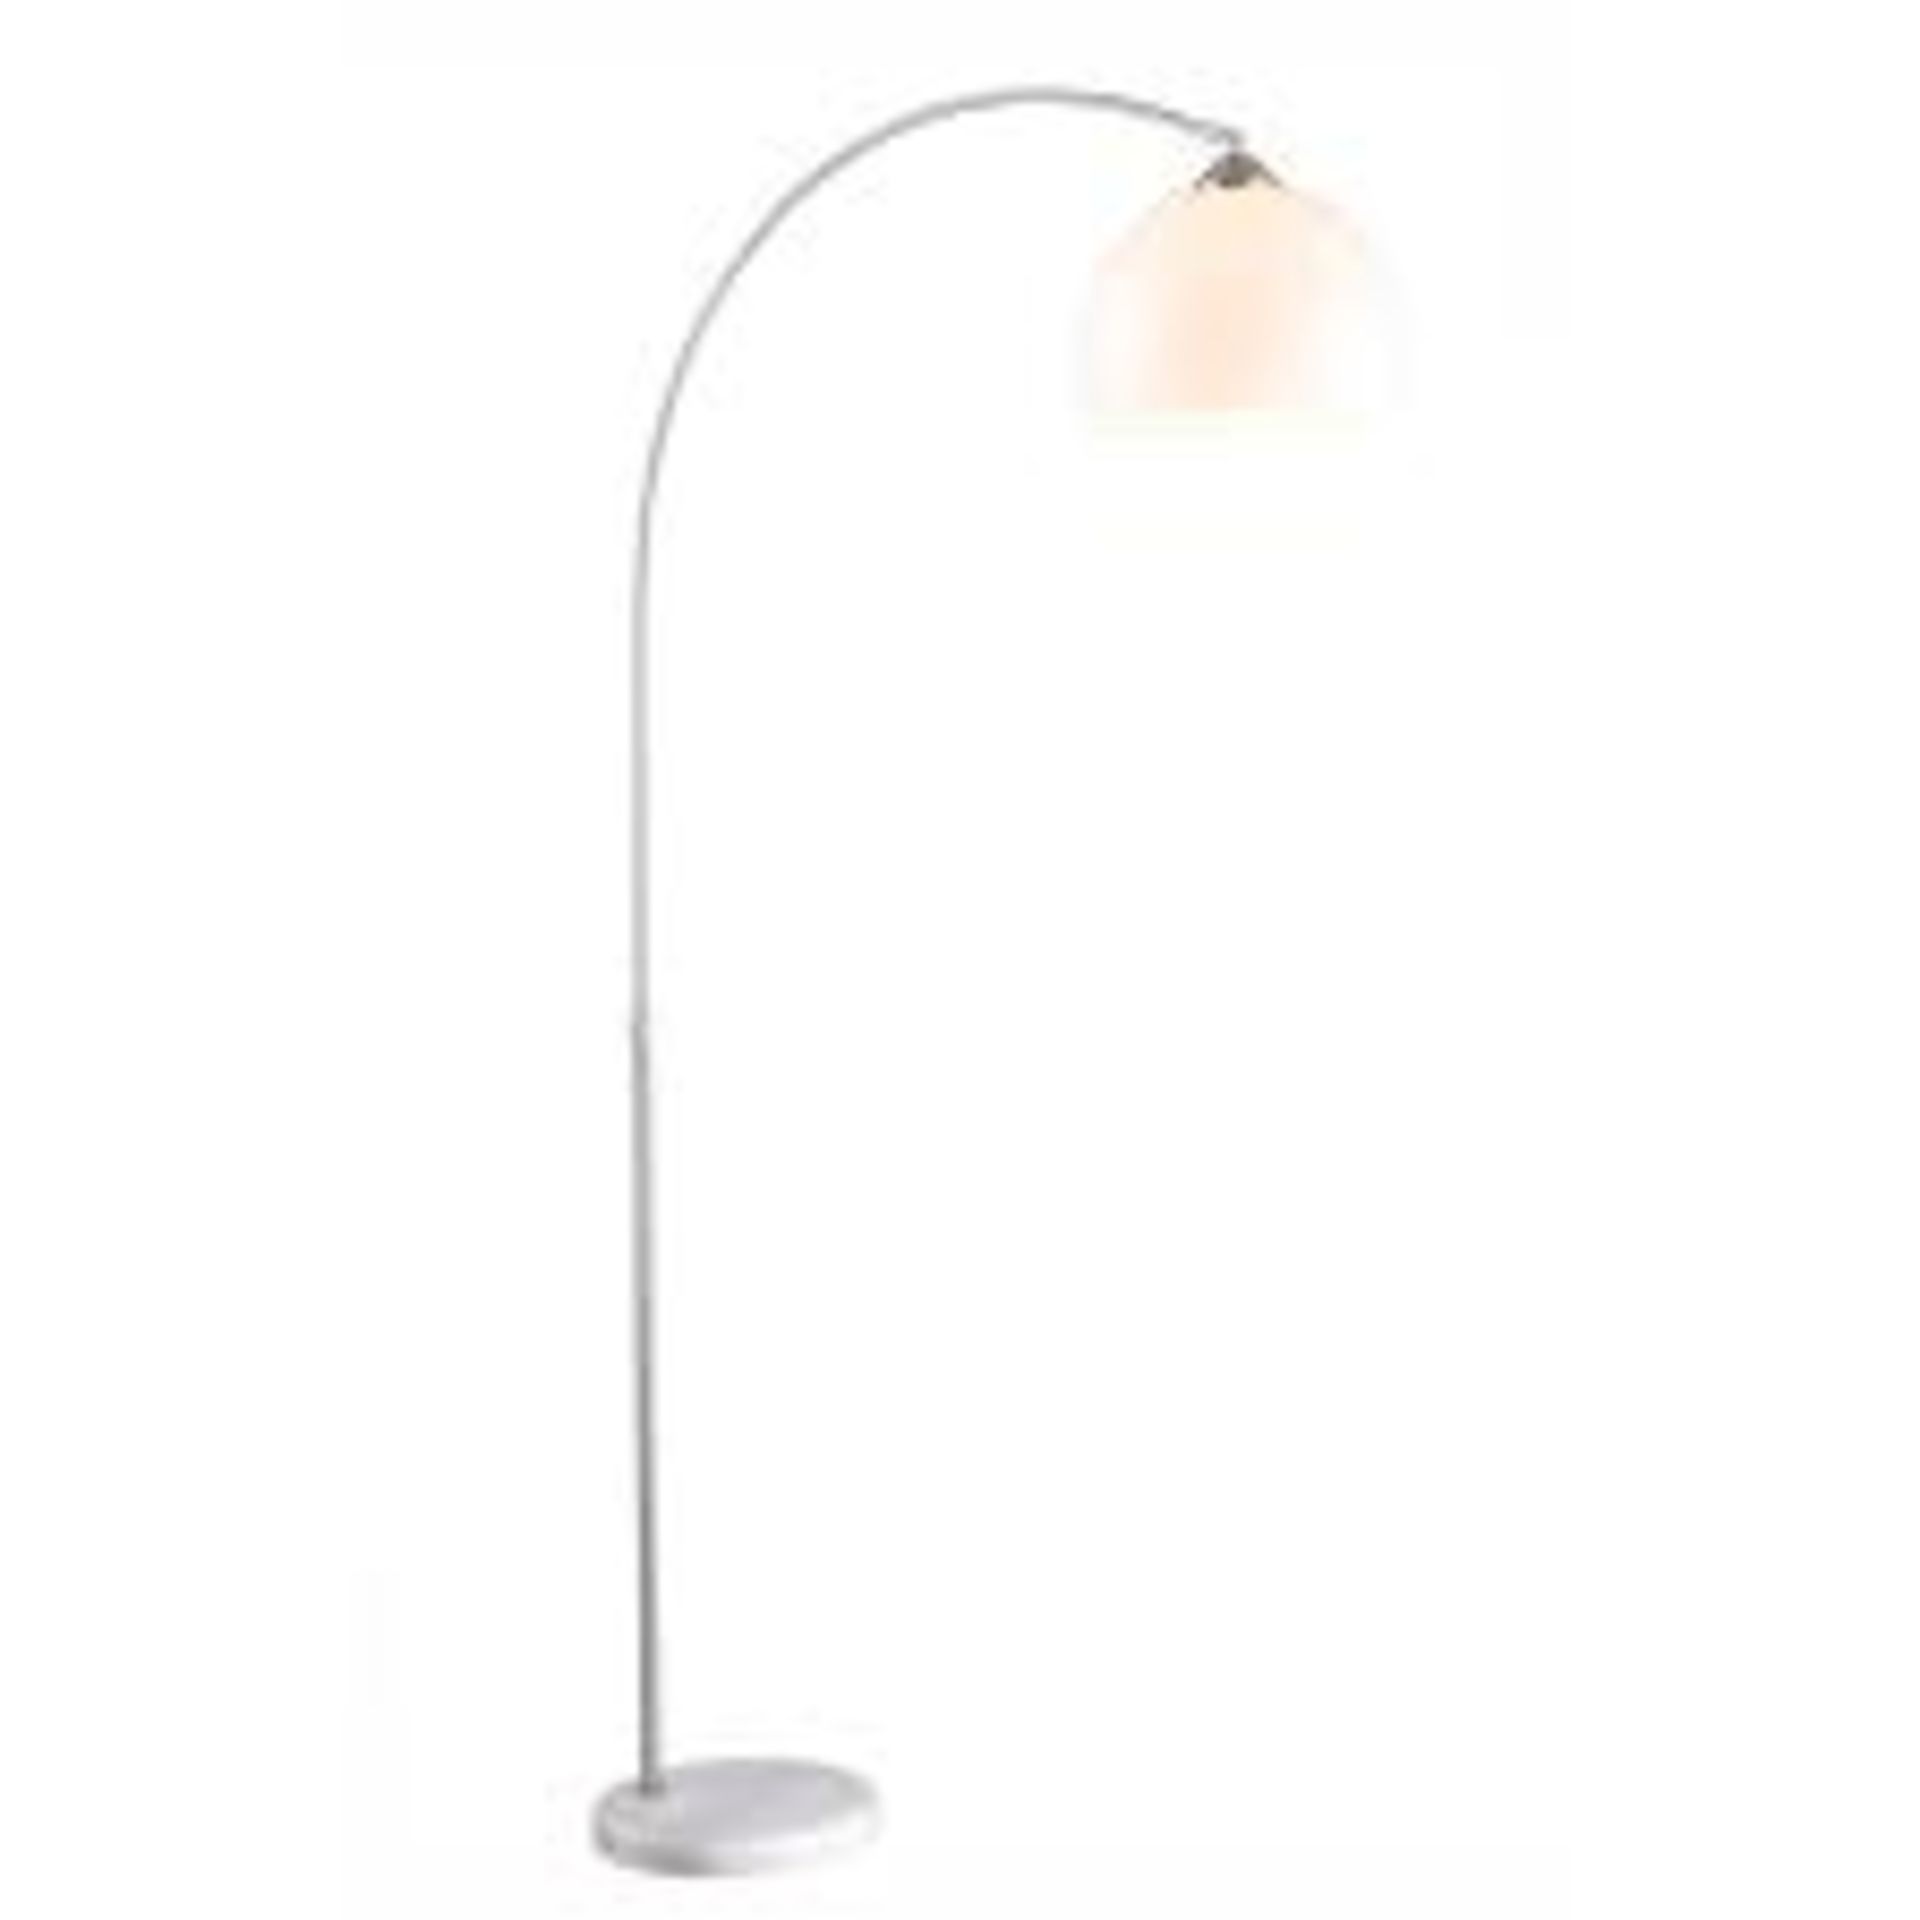 Boxed Globo Lighting Arch Floor Standing Lamp RRP £80 (Public Viewing and Appraisals Available)